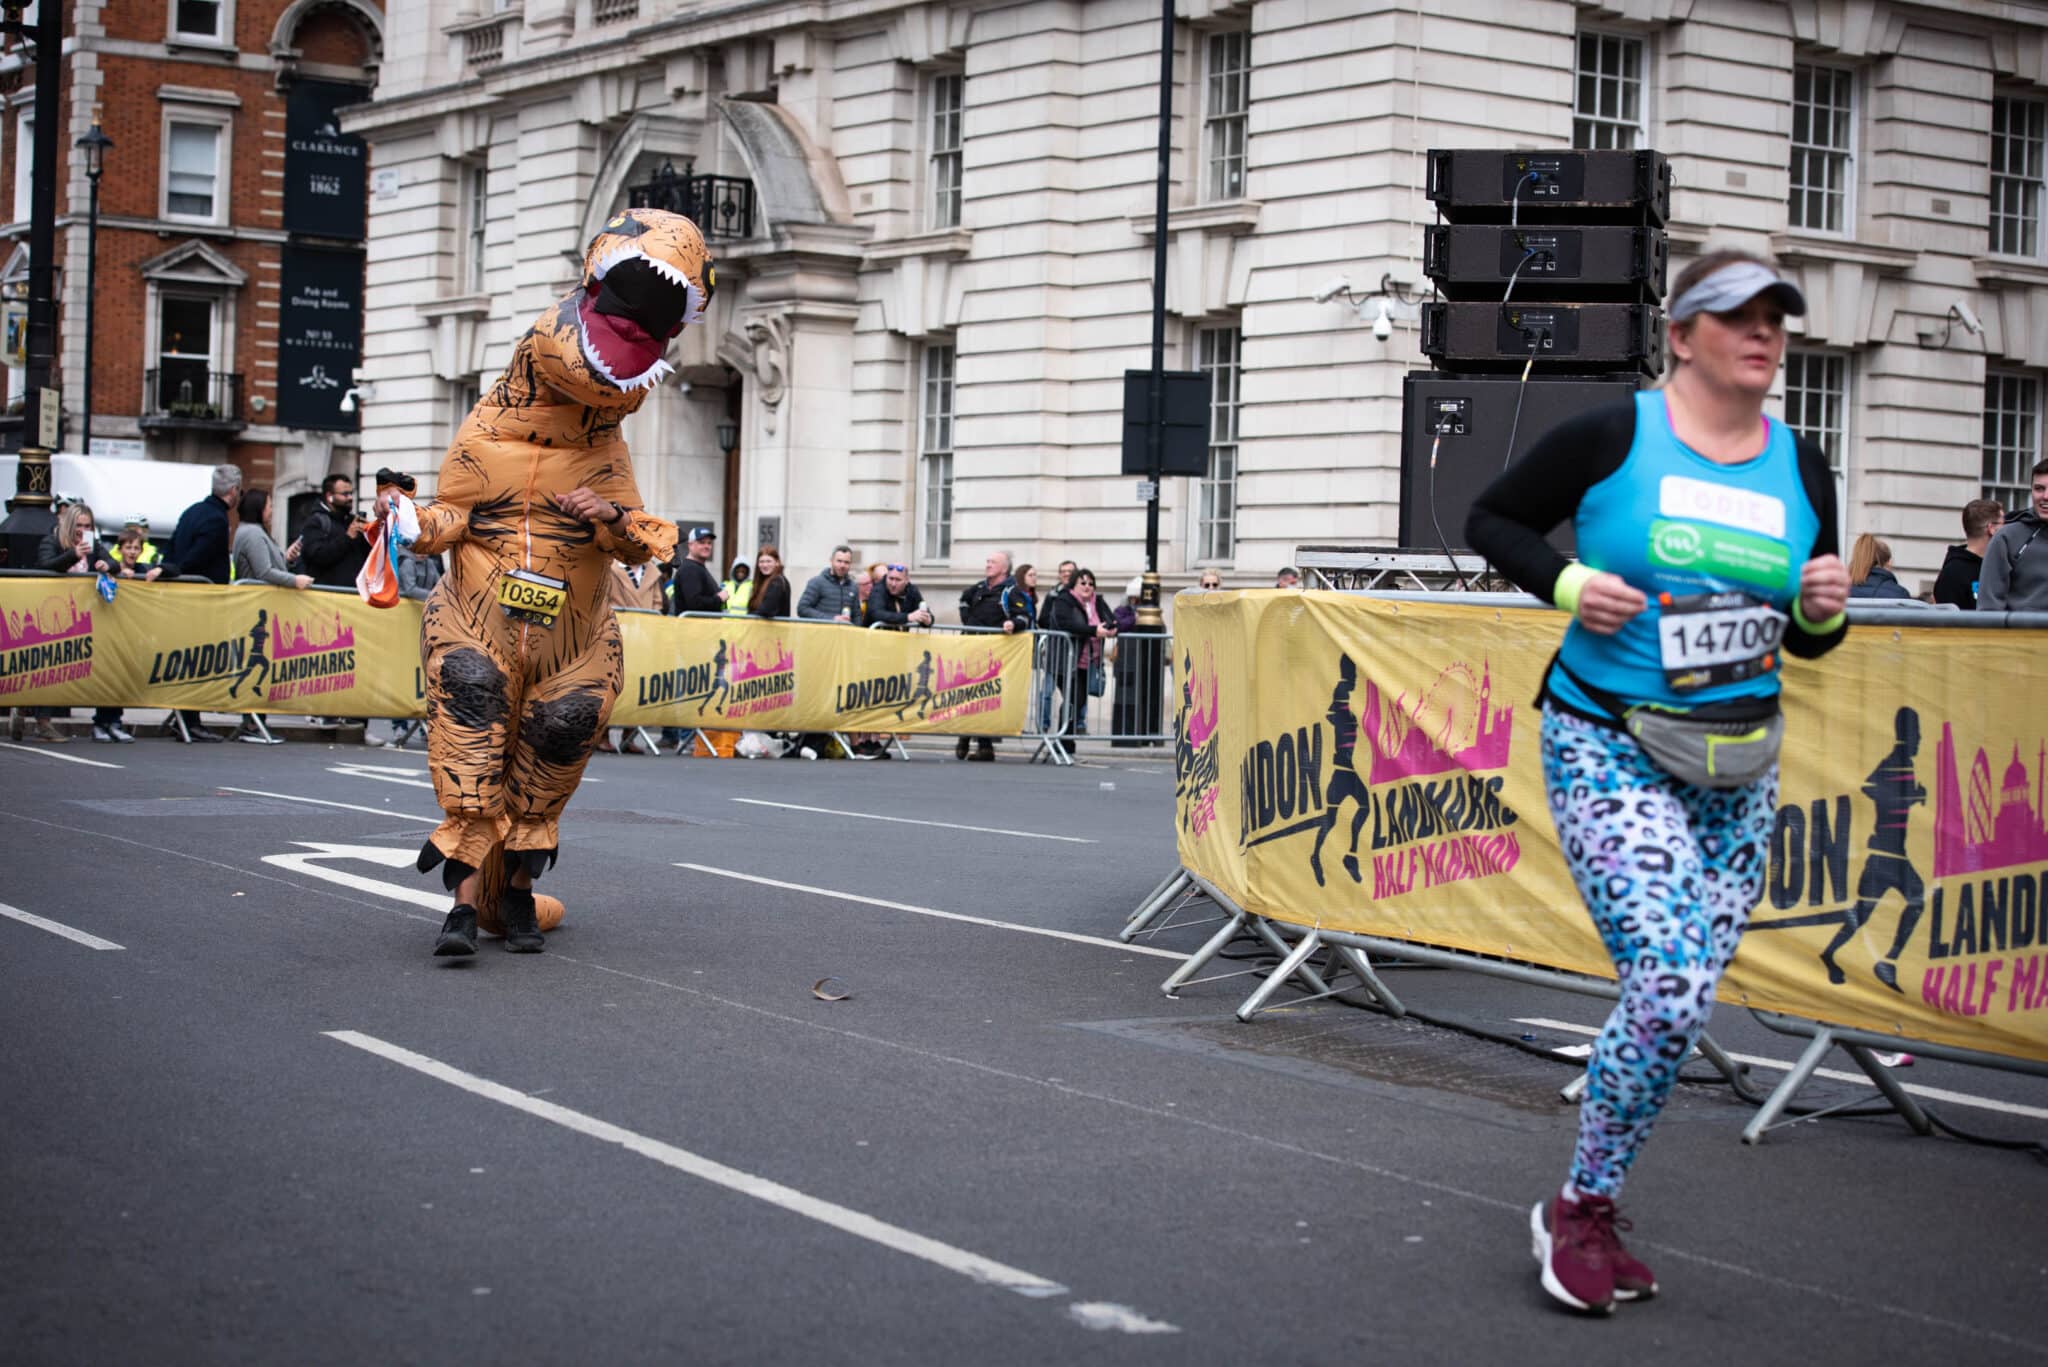 A runner dressed as a dinosaur approaches the finish line during the London Landmarks Half Marathon through Westminster and the City